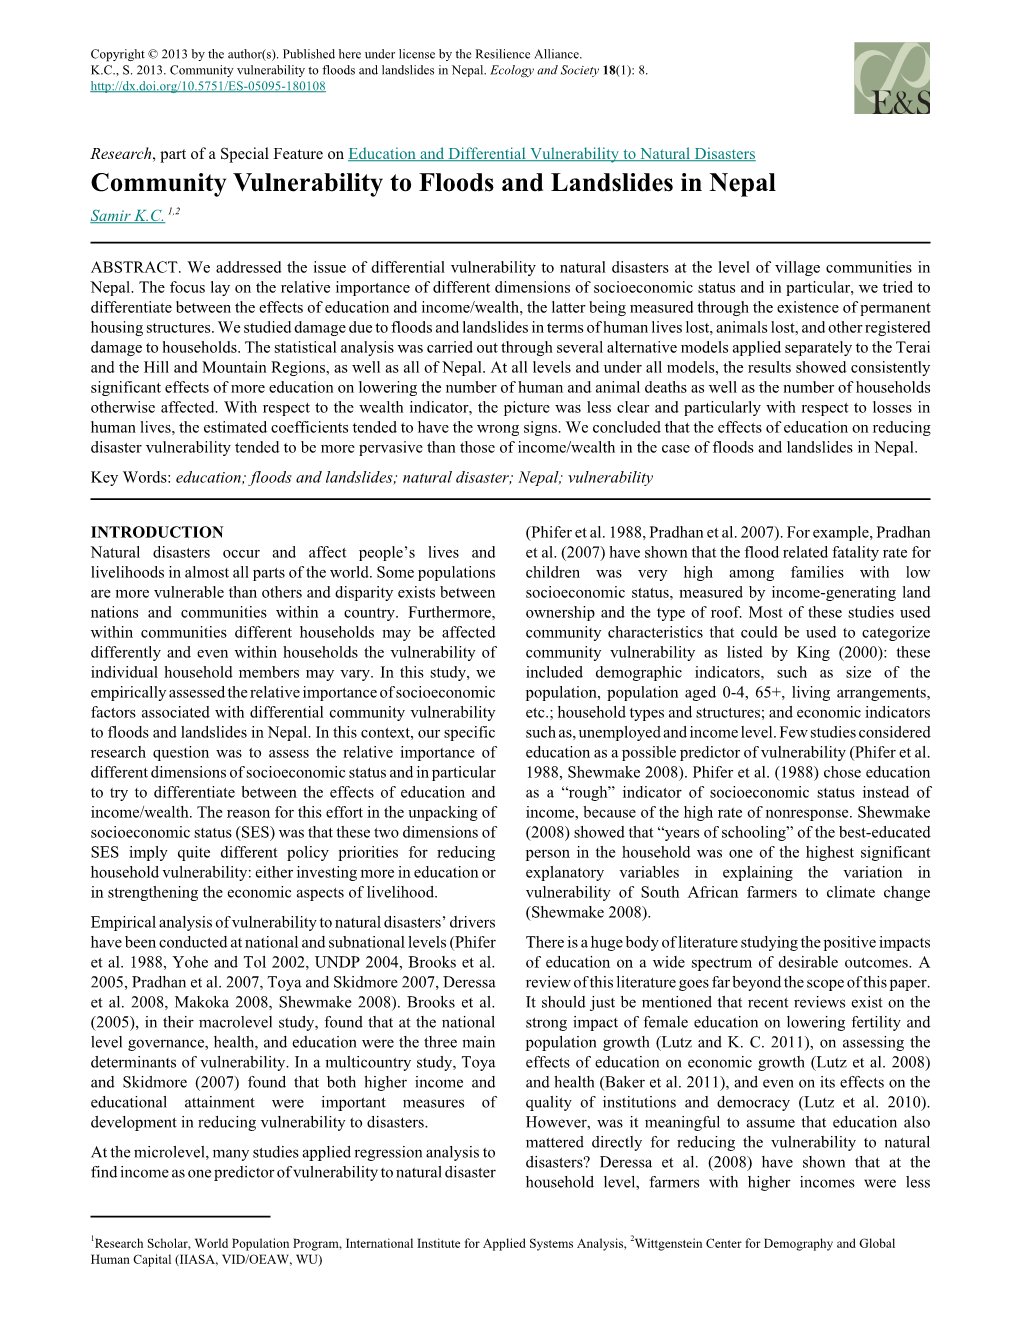 Community Vulnerability to Floods and Landslides in Nepal